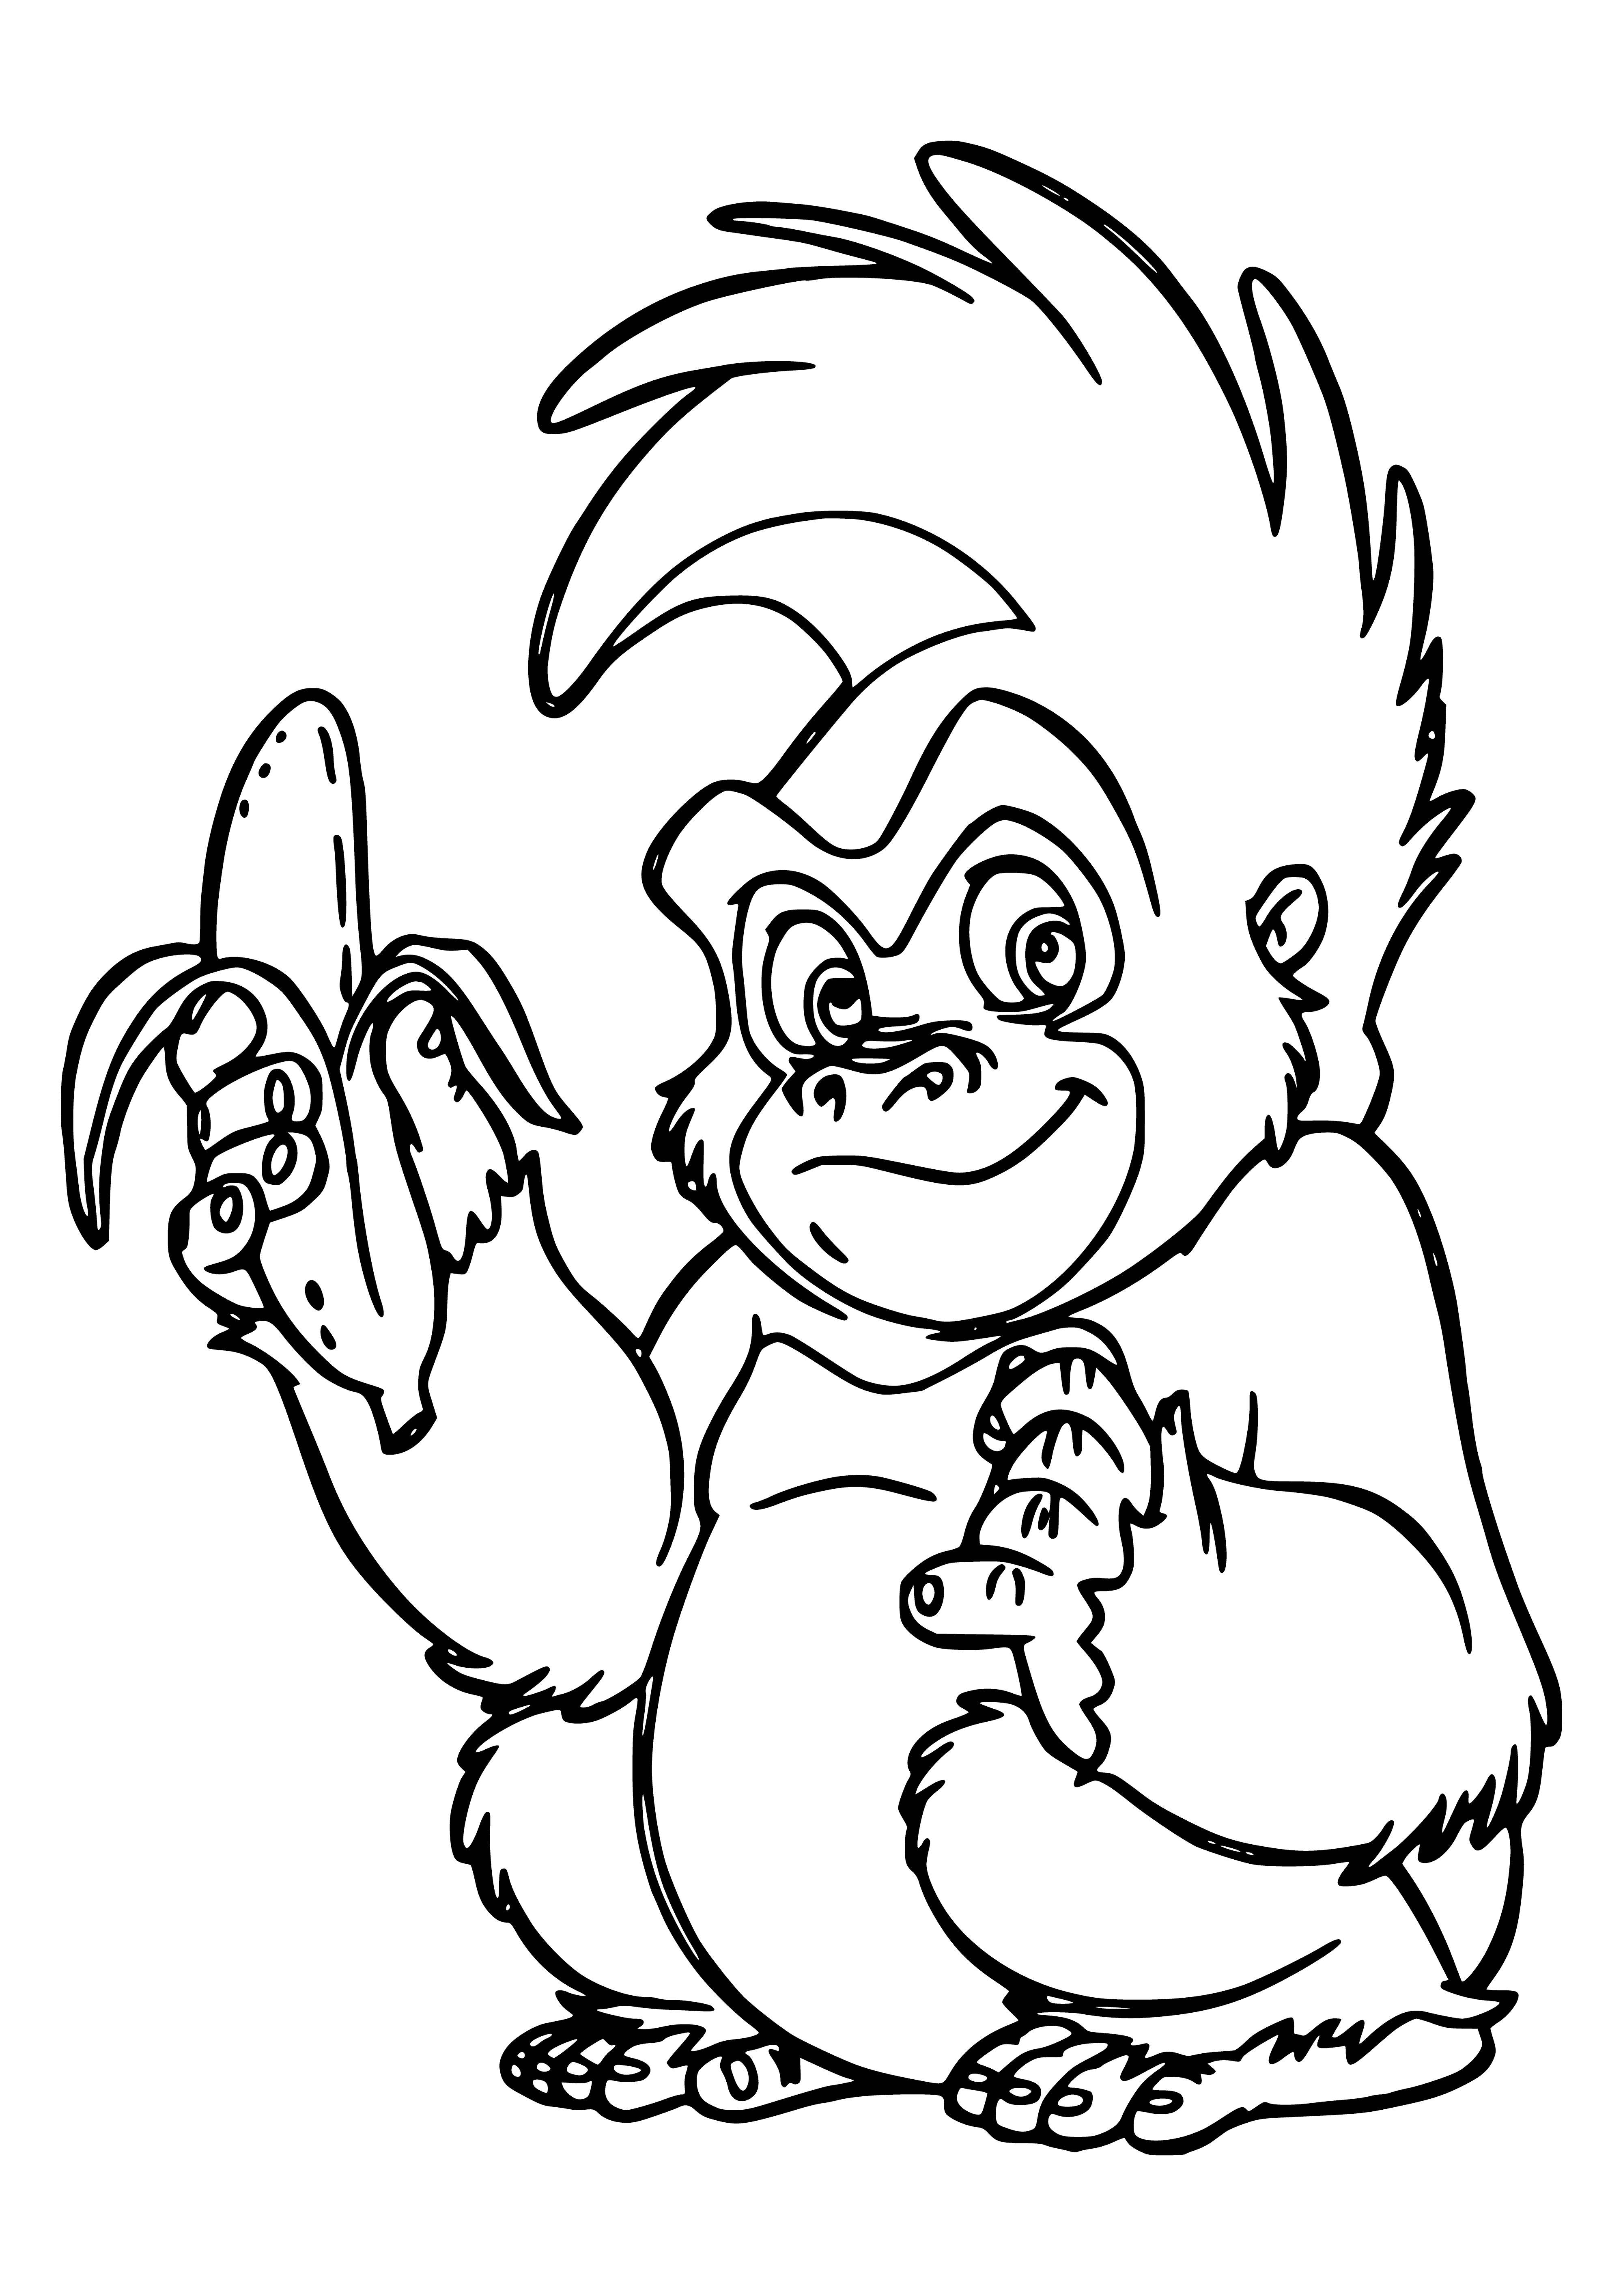 coloring page: A large brown gorilla sits cross-armed on a tree branch, with blue eyes.